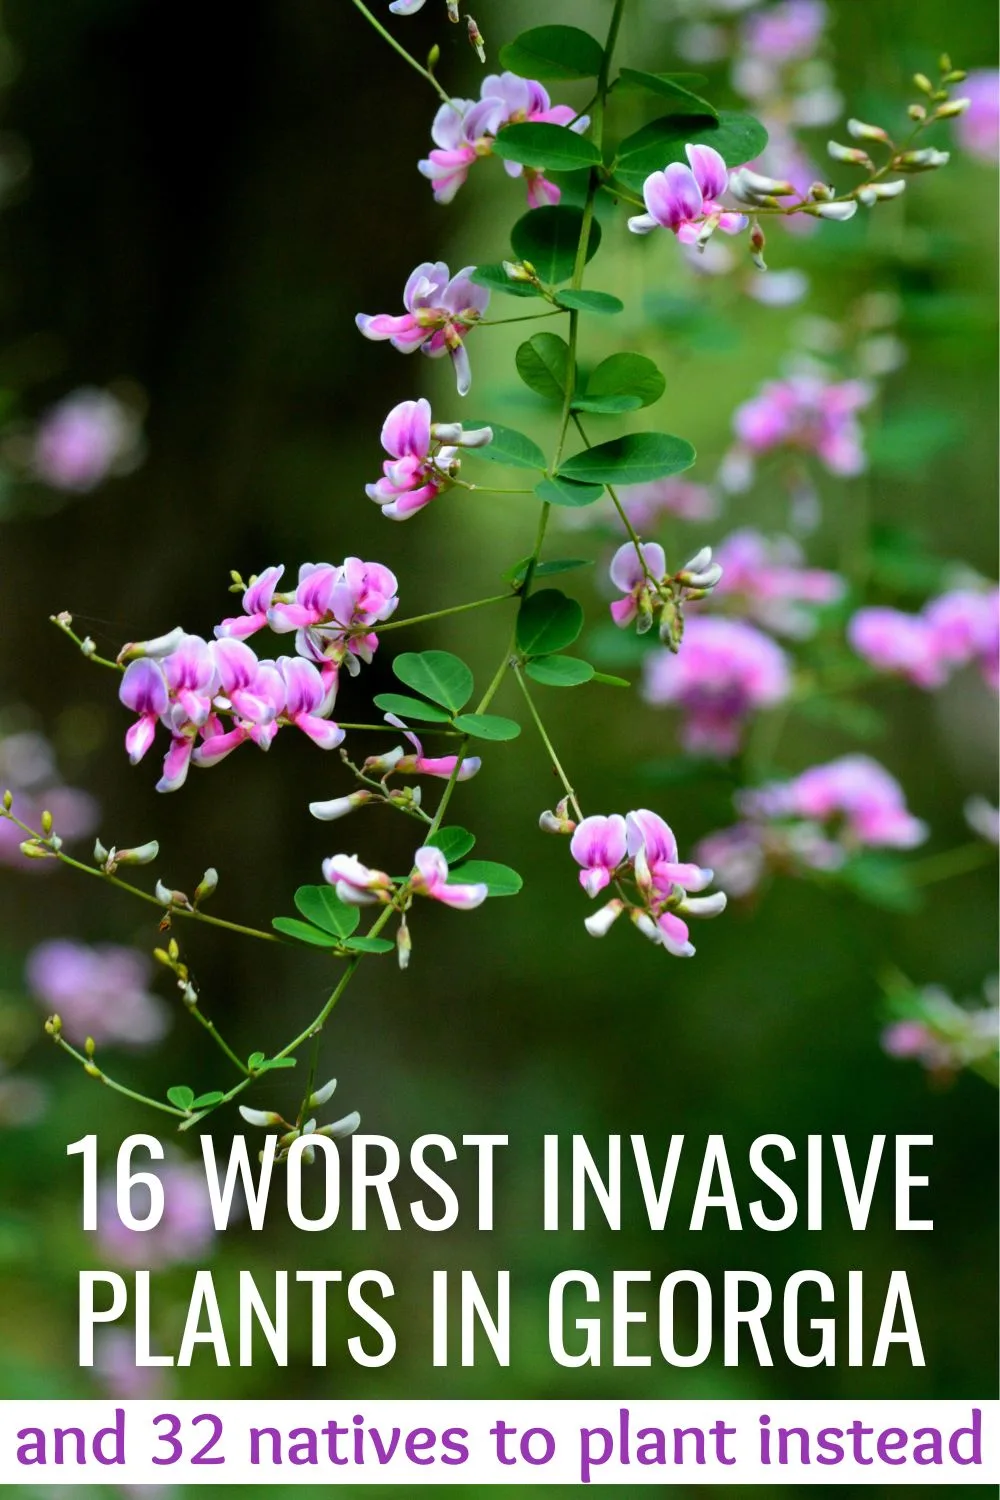 16 worst invasive plants in Georgia and 32 natives to plant instead